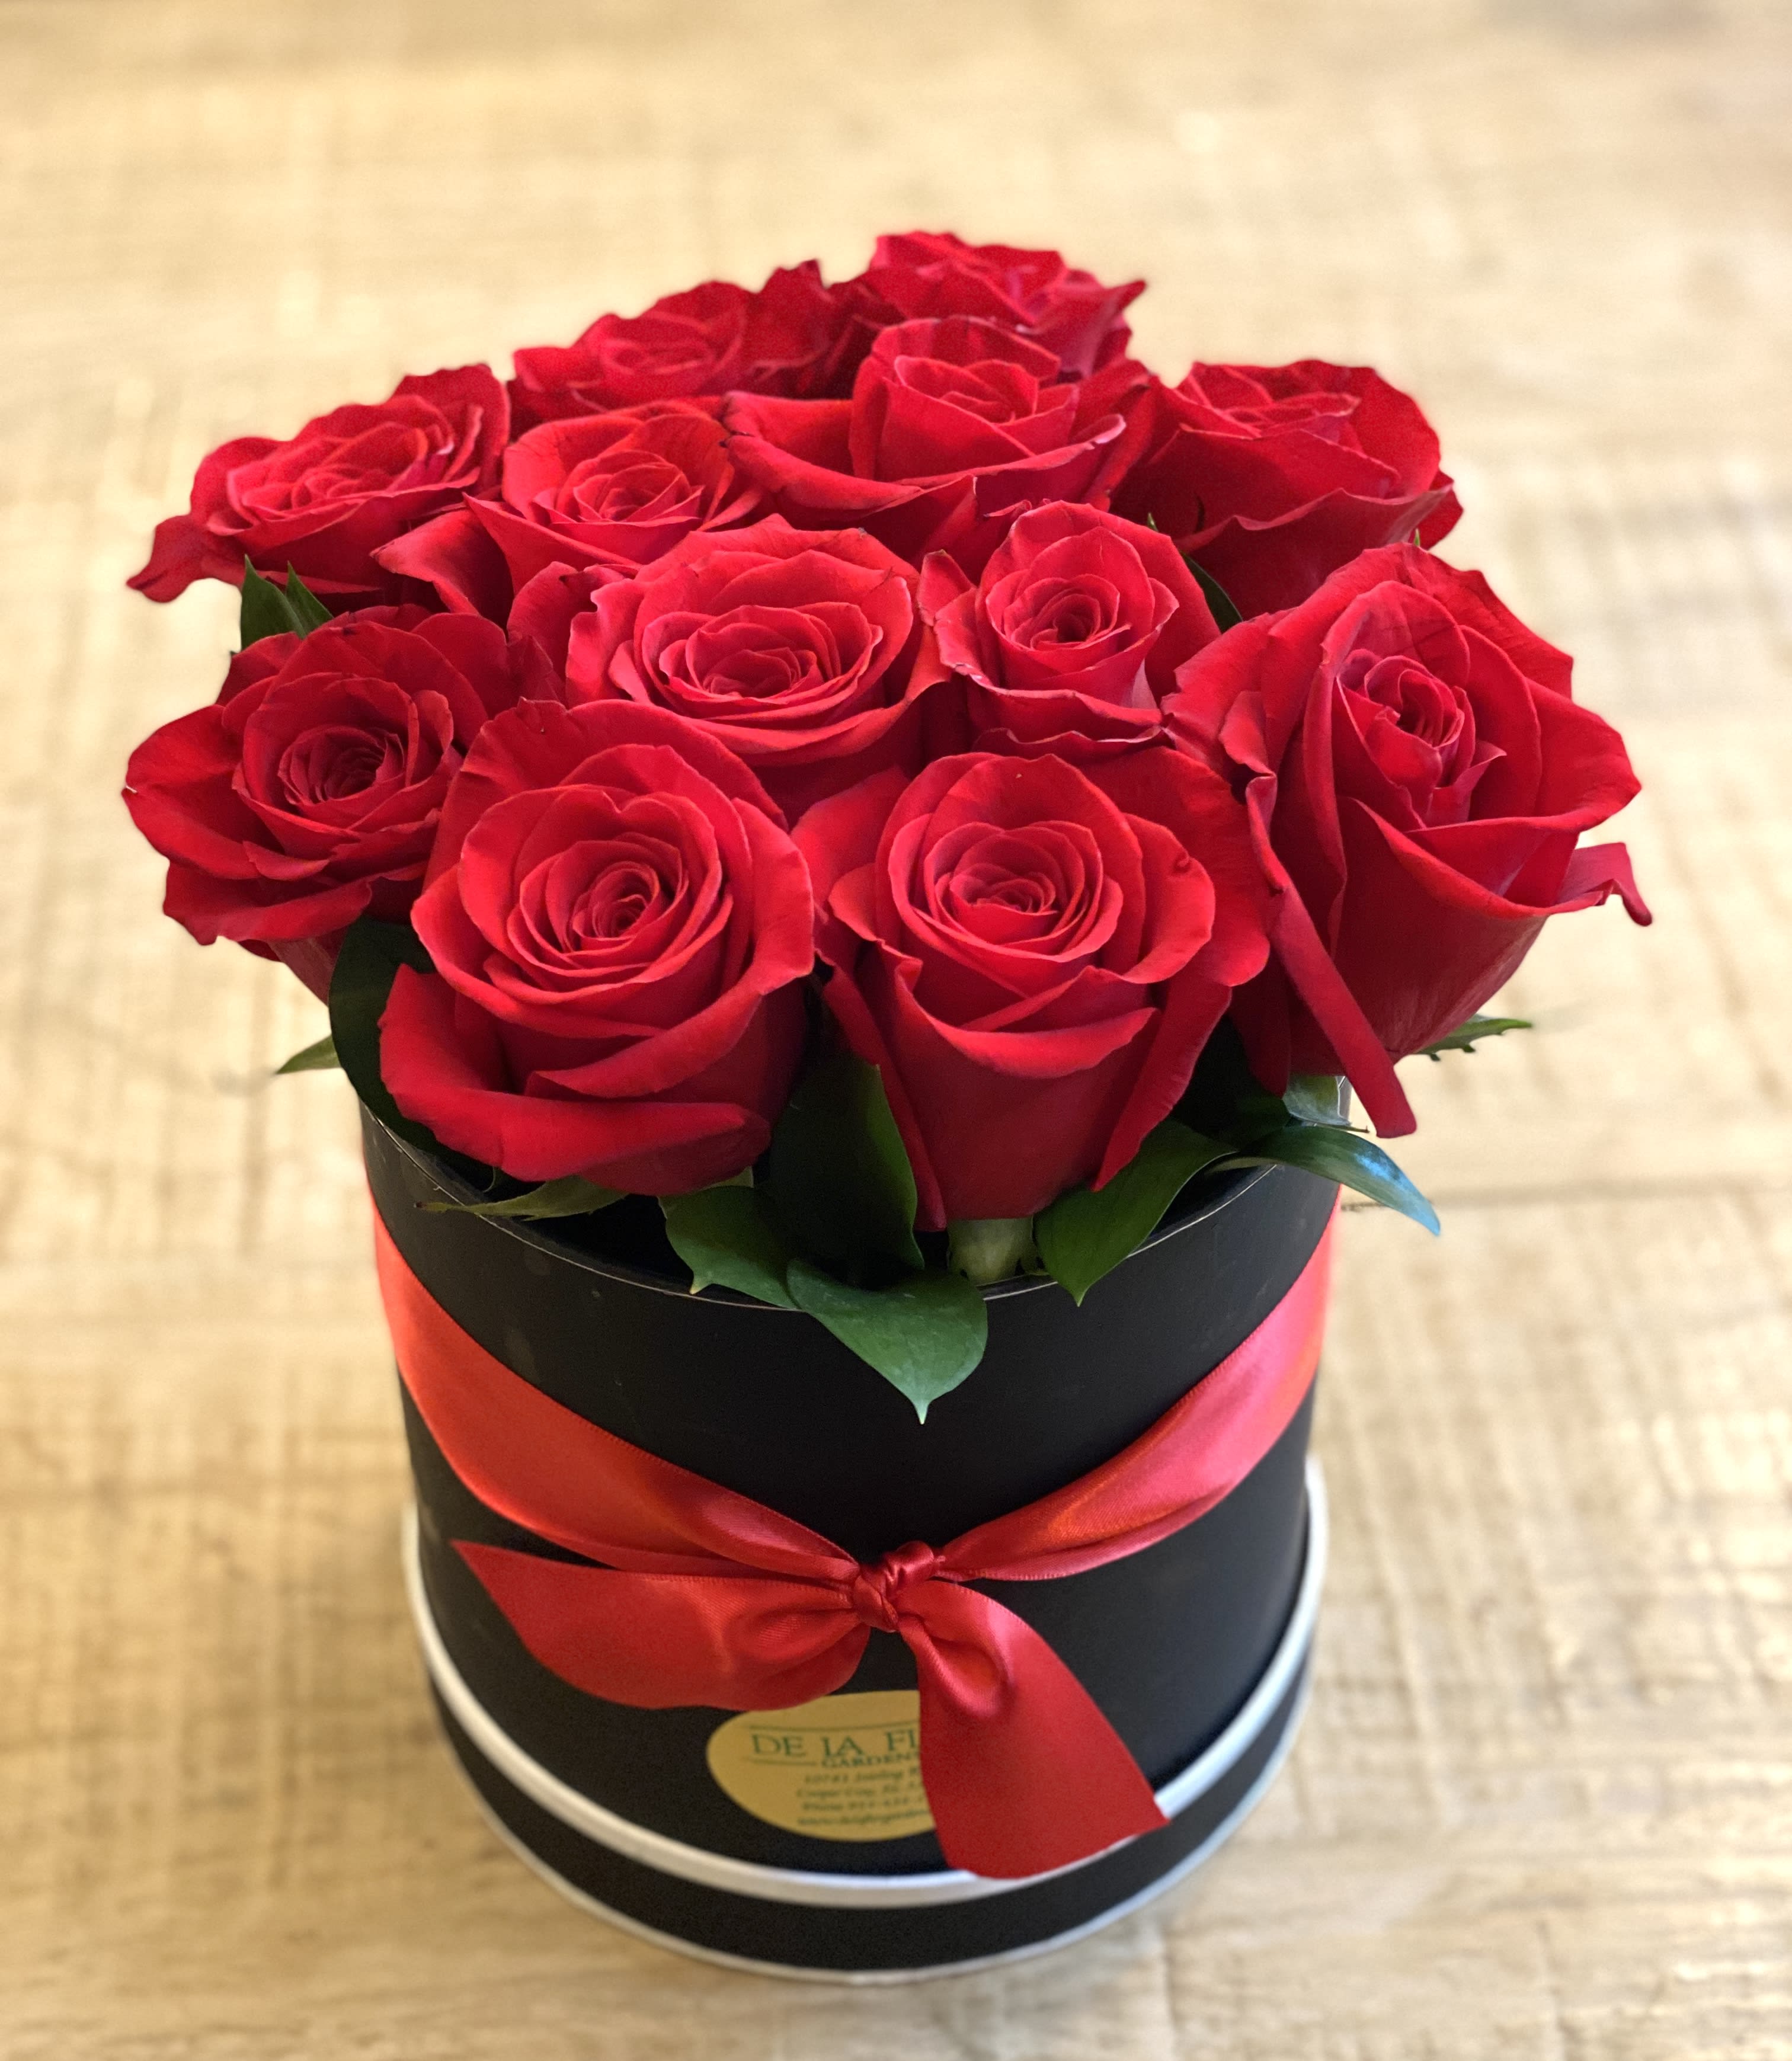 Red Rose Hatbox  - Enjoy a dozen premium red roses in an elegant hatbox. Available for pickup or local delivery only.